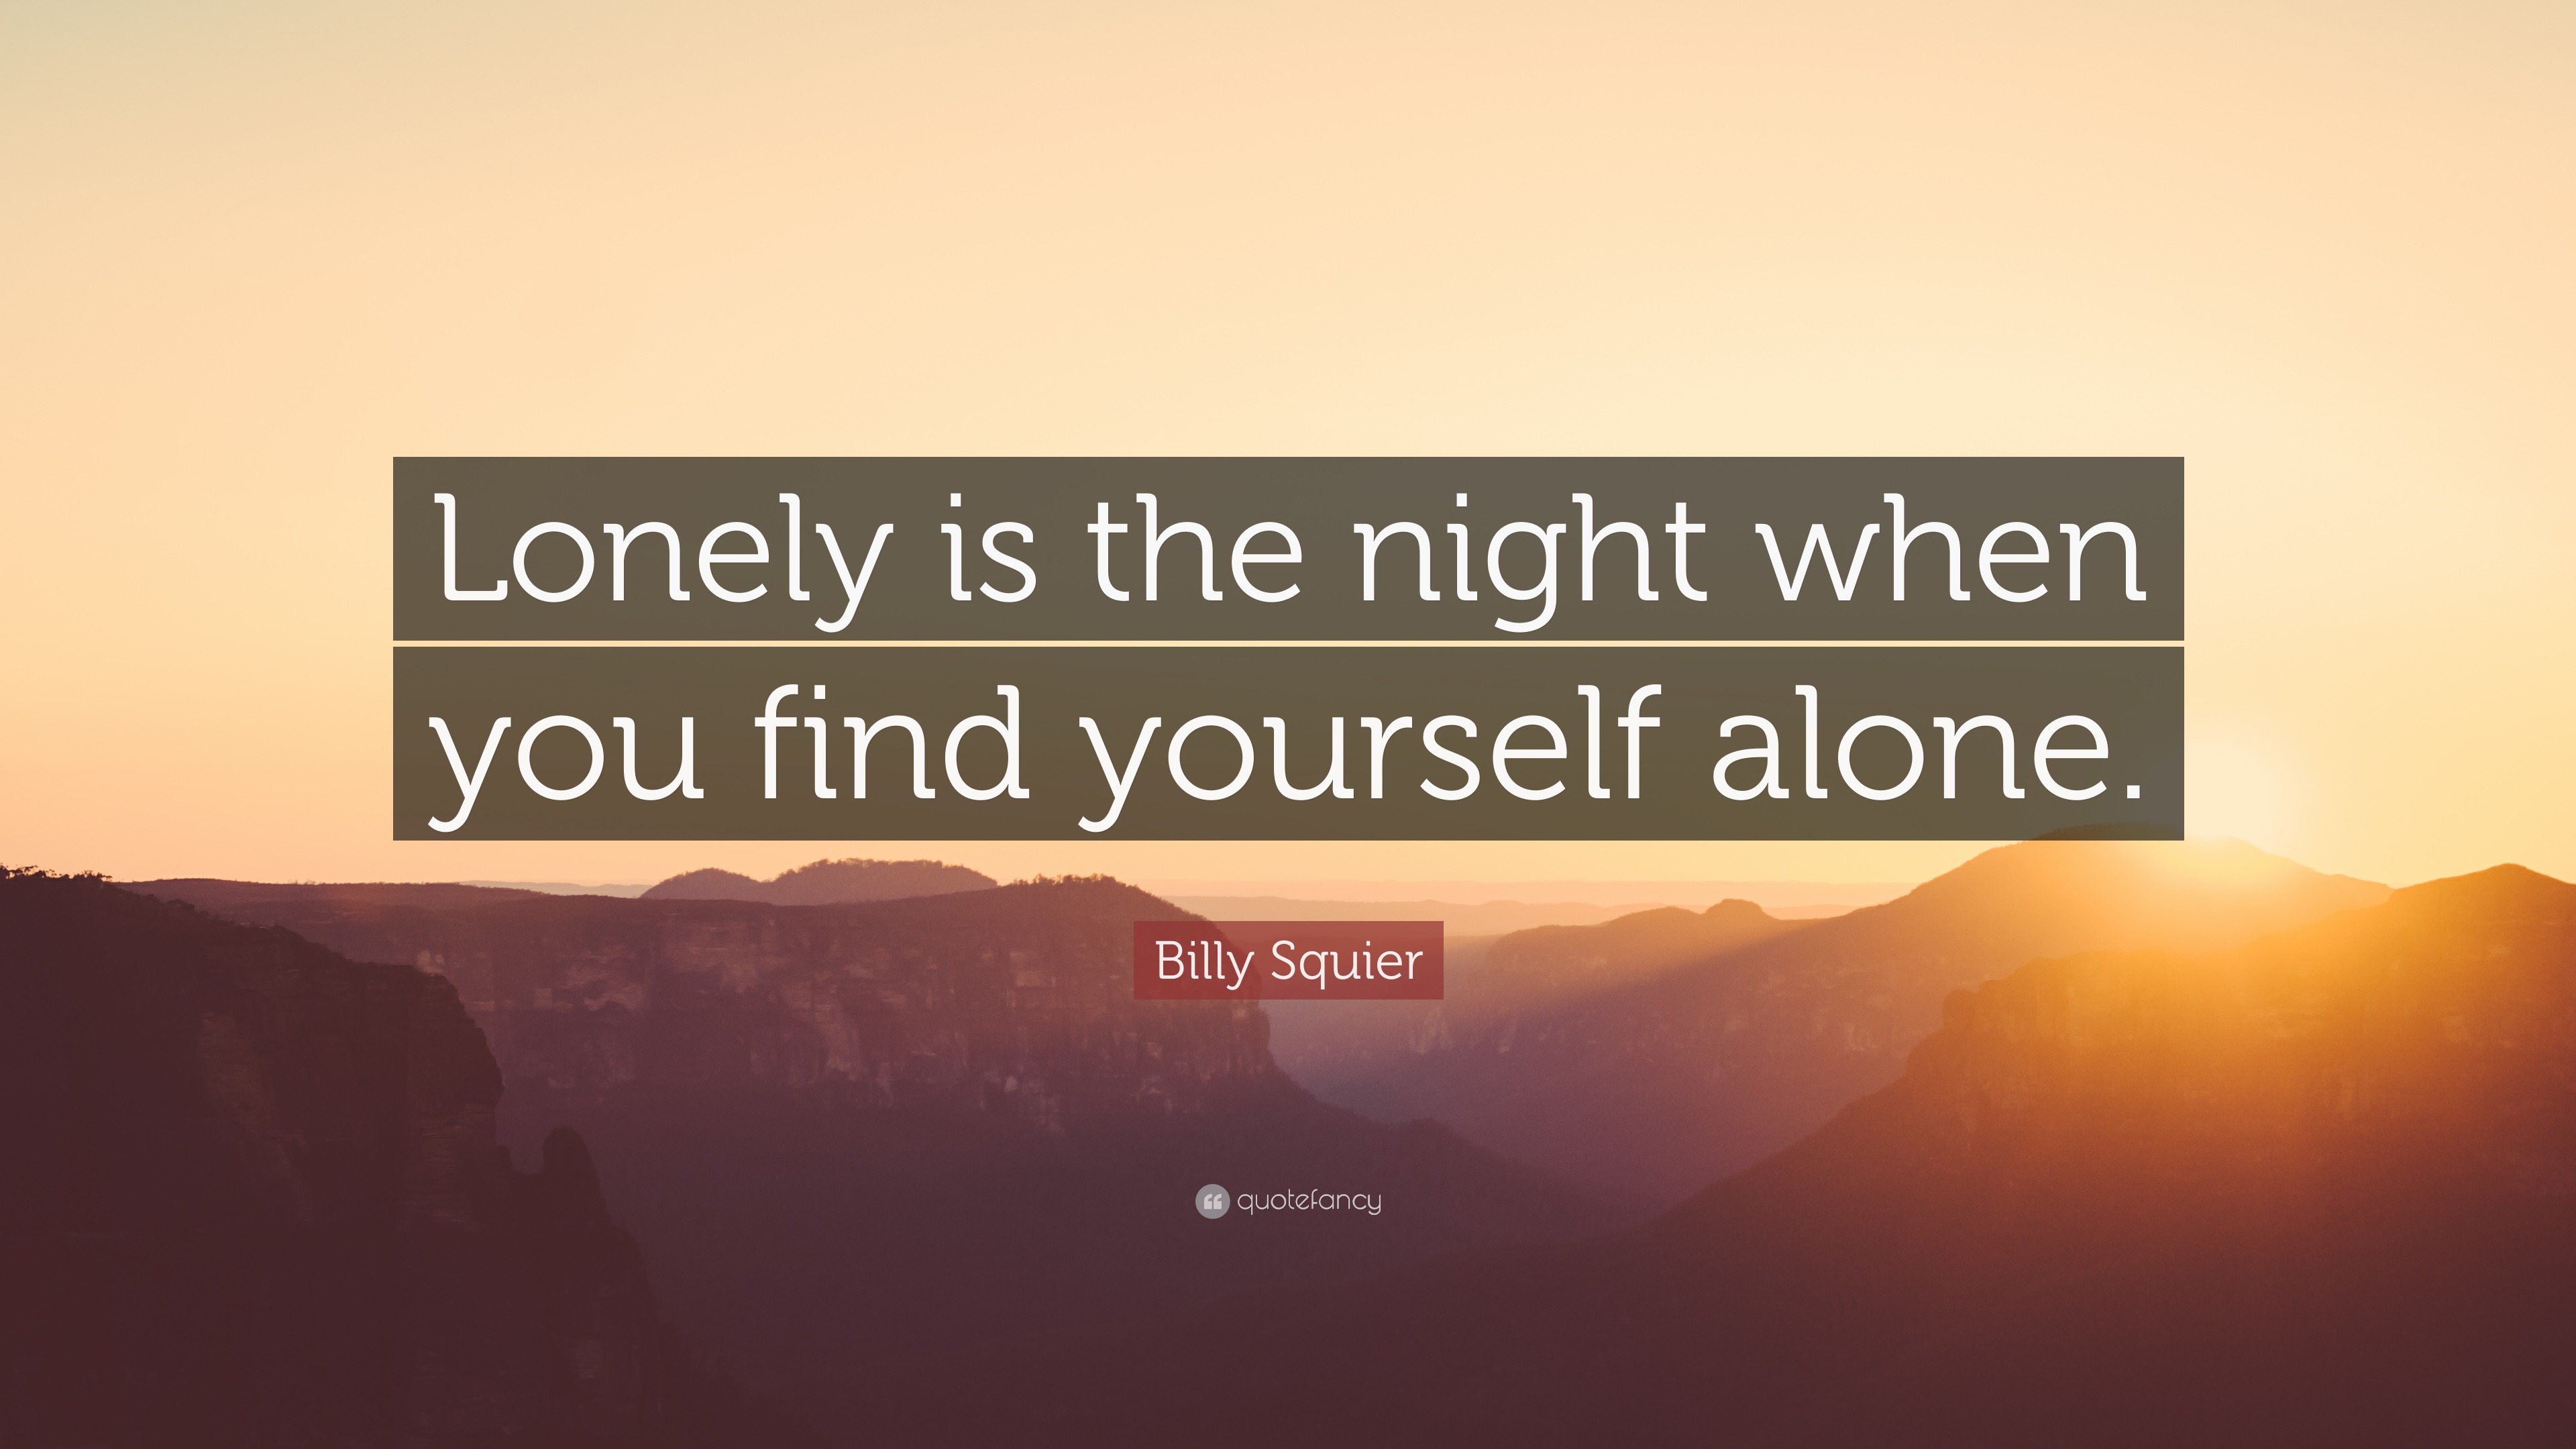 Billy Squier Quote: “Lonely is the night when you find yourself alone.”